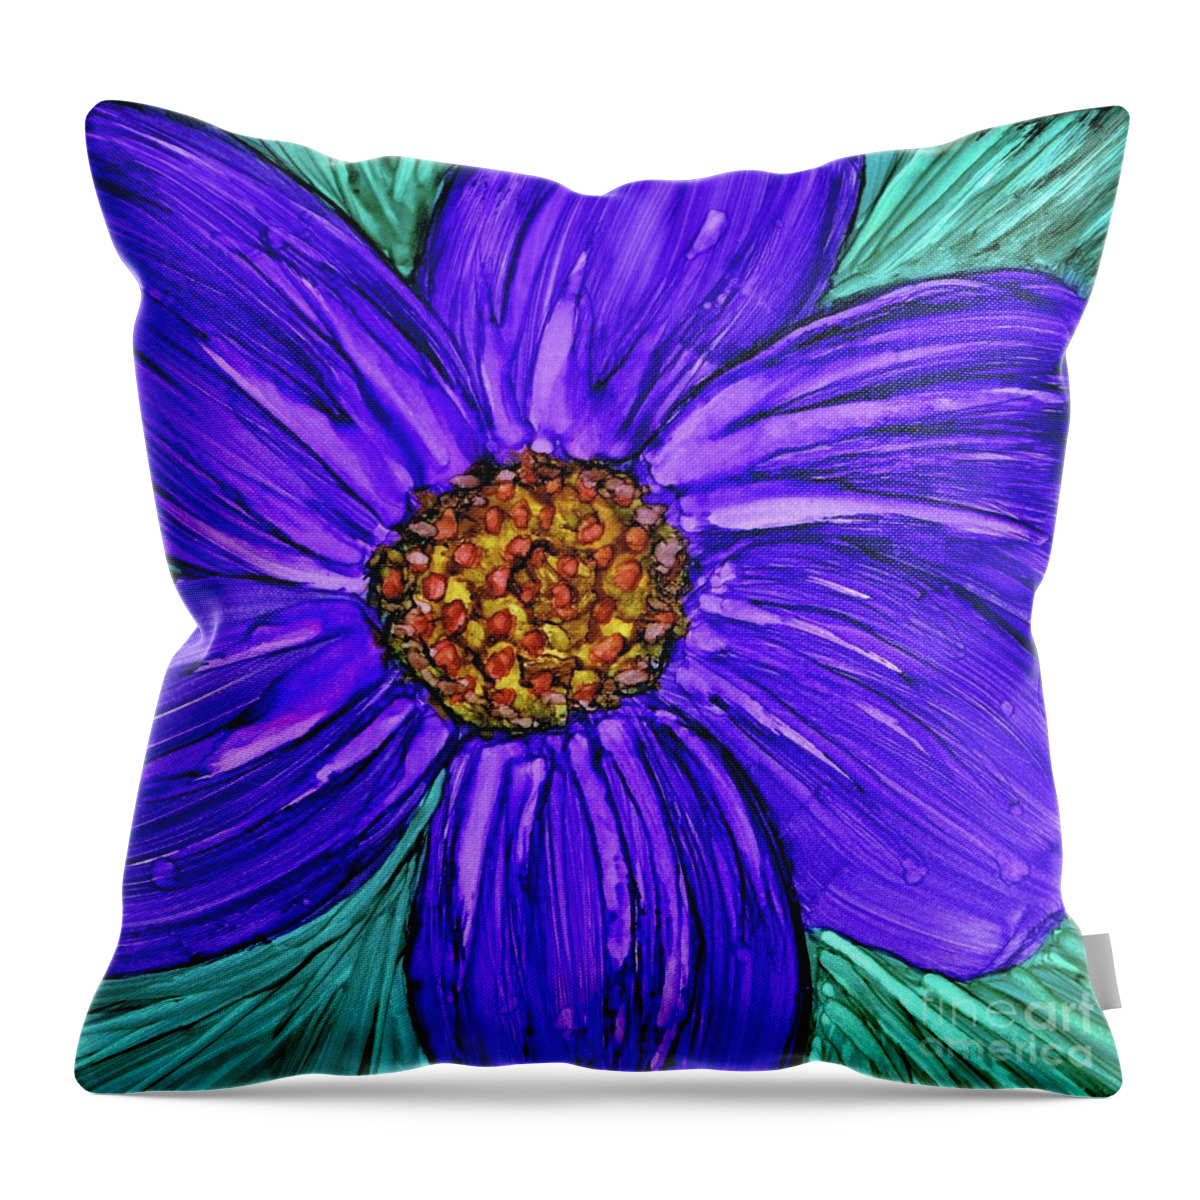 Hao Aiken Throw Pillow featuring the painting One Pretty Purple Flower by Hao Aiken